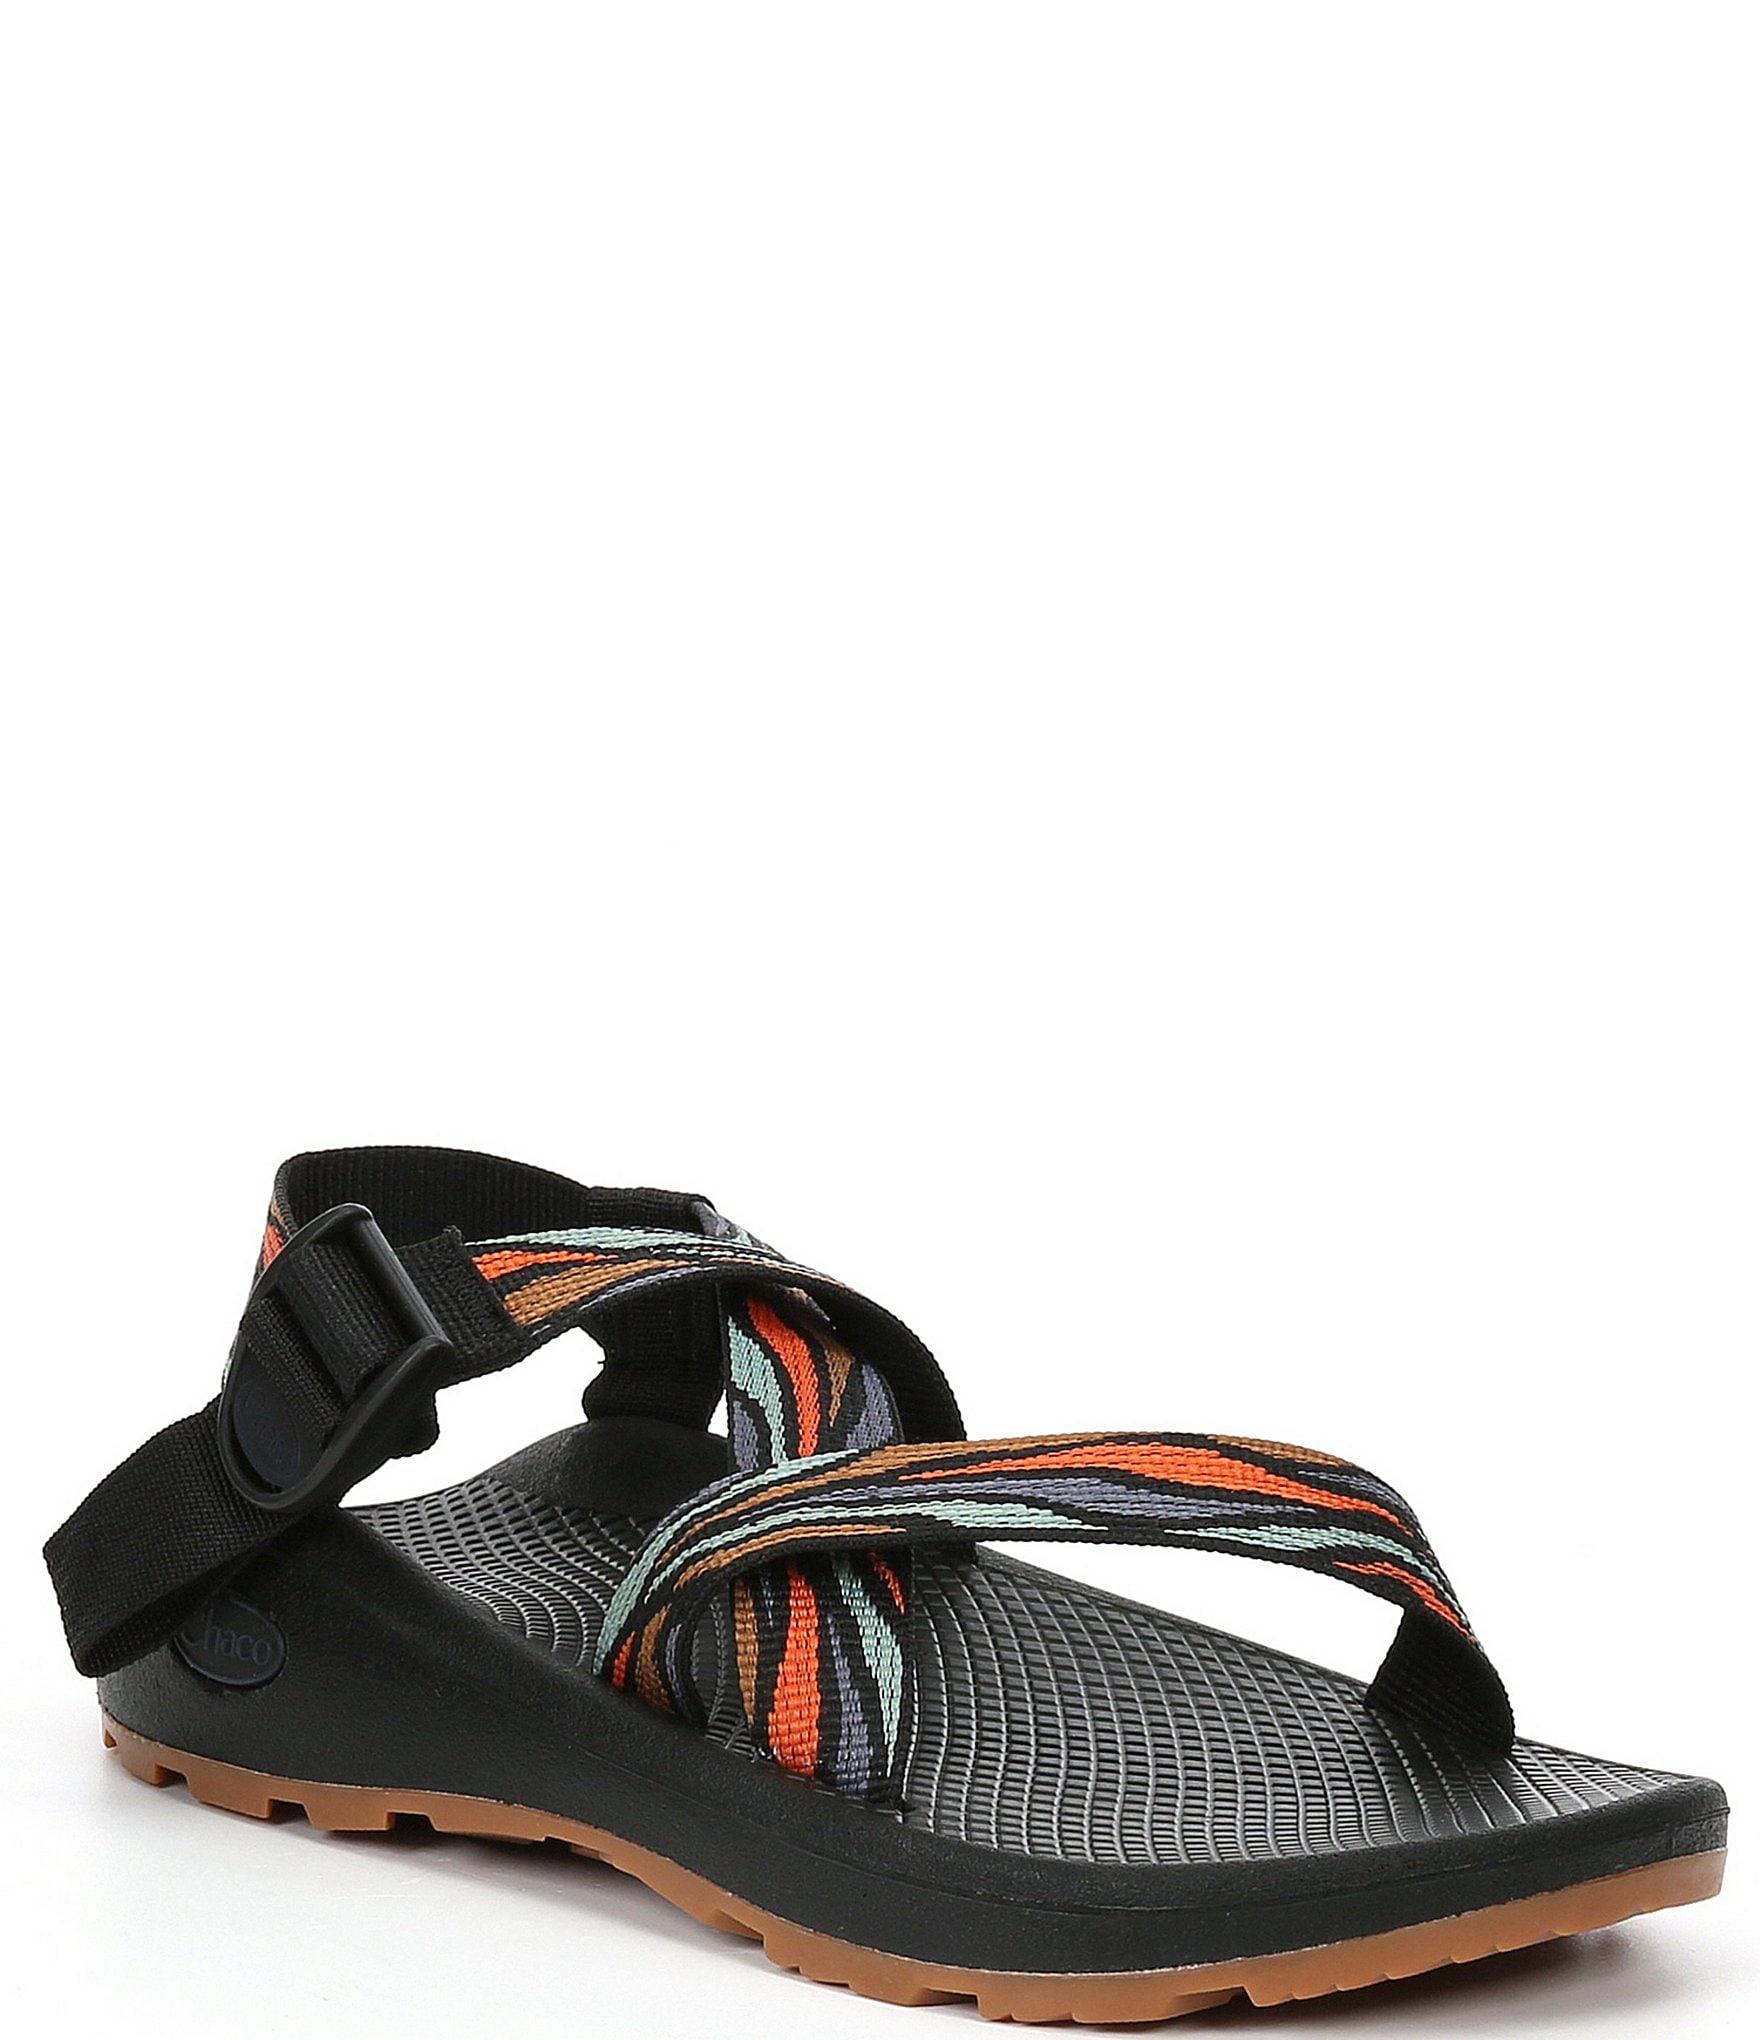 Whole Earth Provision Co.  chaco Chaco Men's Z/Cloud Sandals